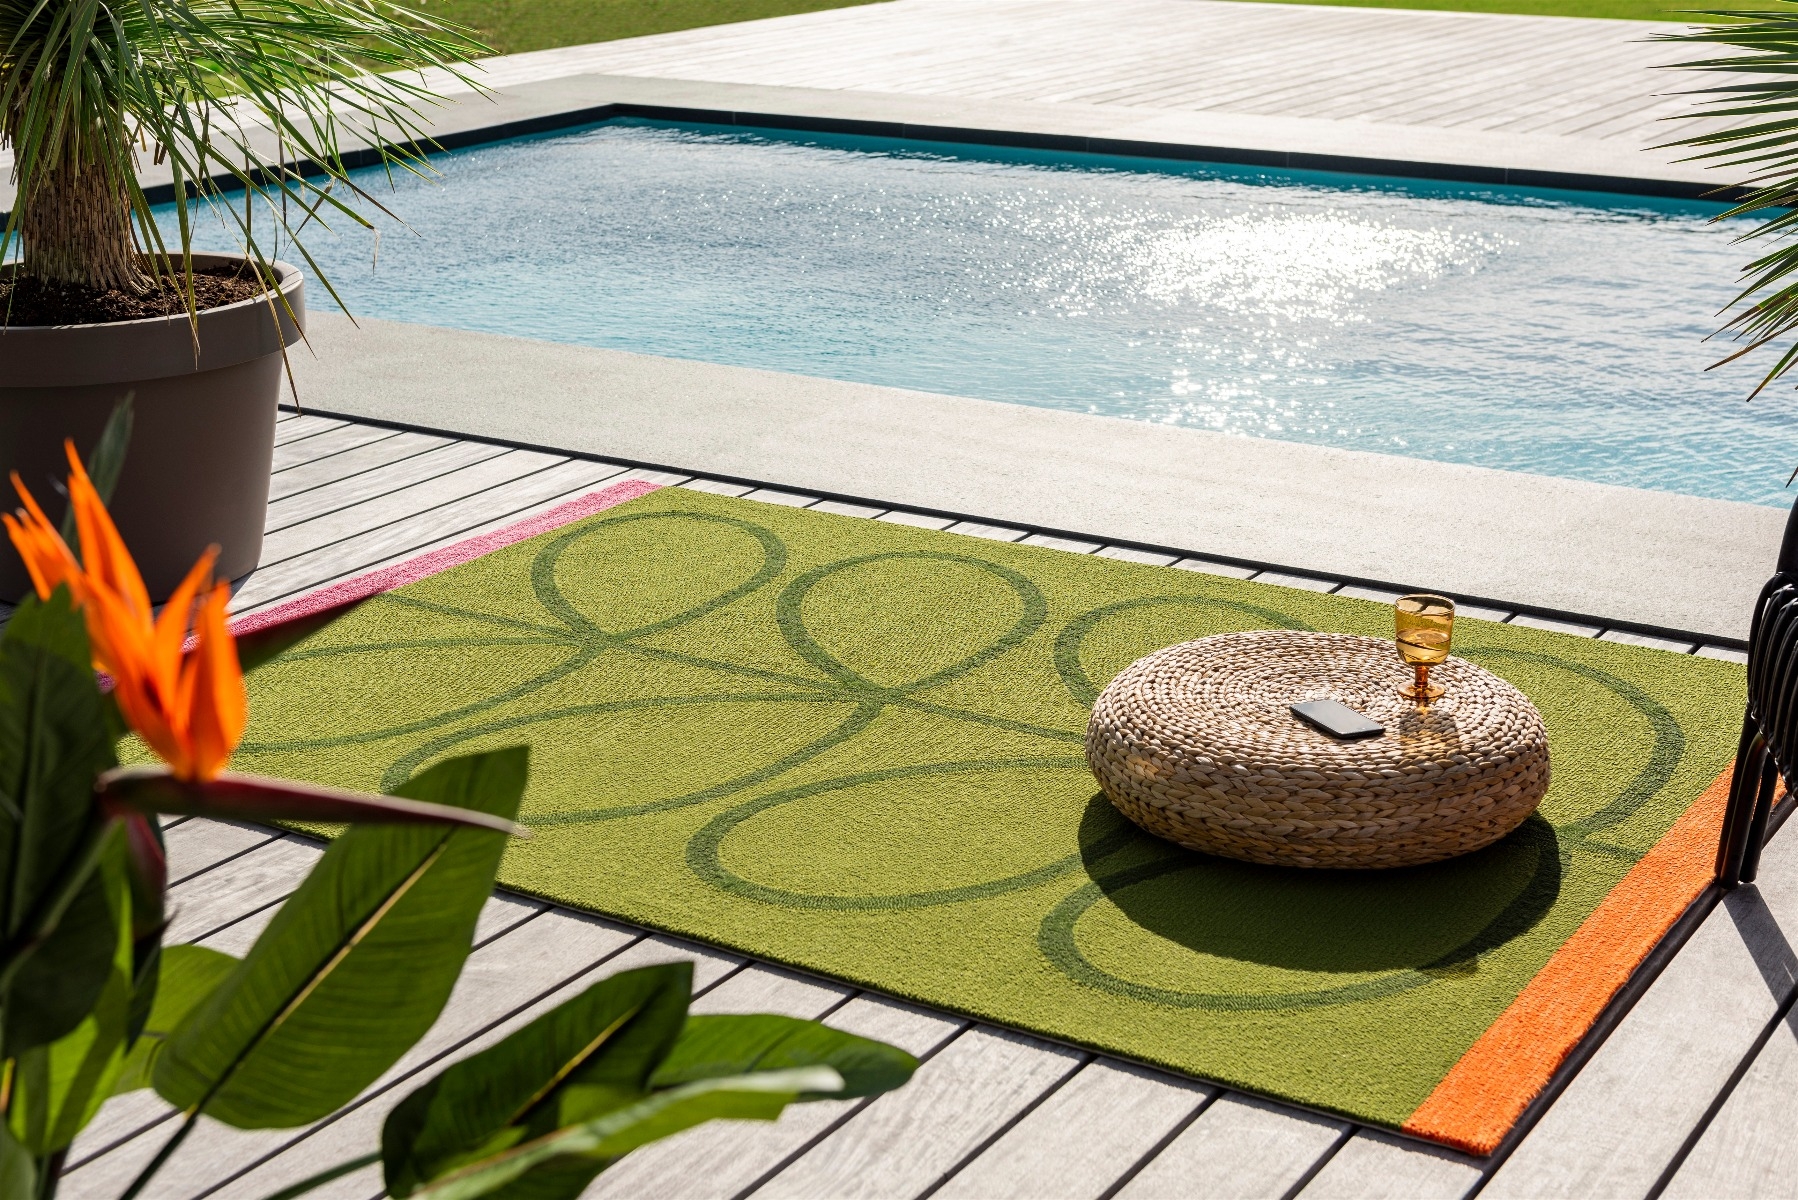 Giant Linear St Seagrass Outdoor 460607 Rug ☞ Size: 250 x 350 cm